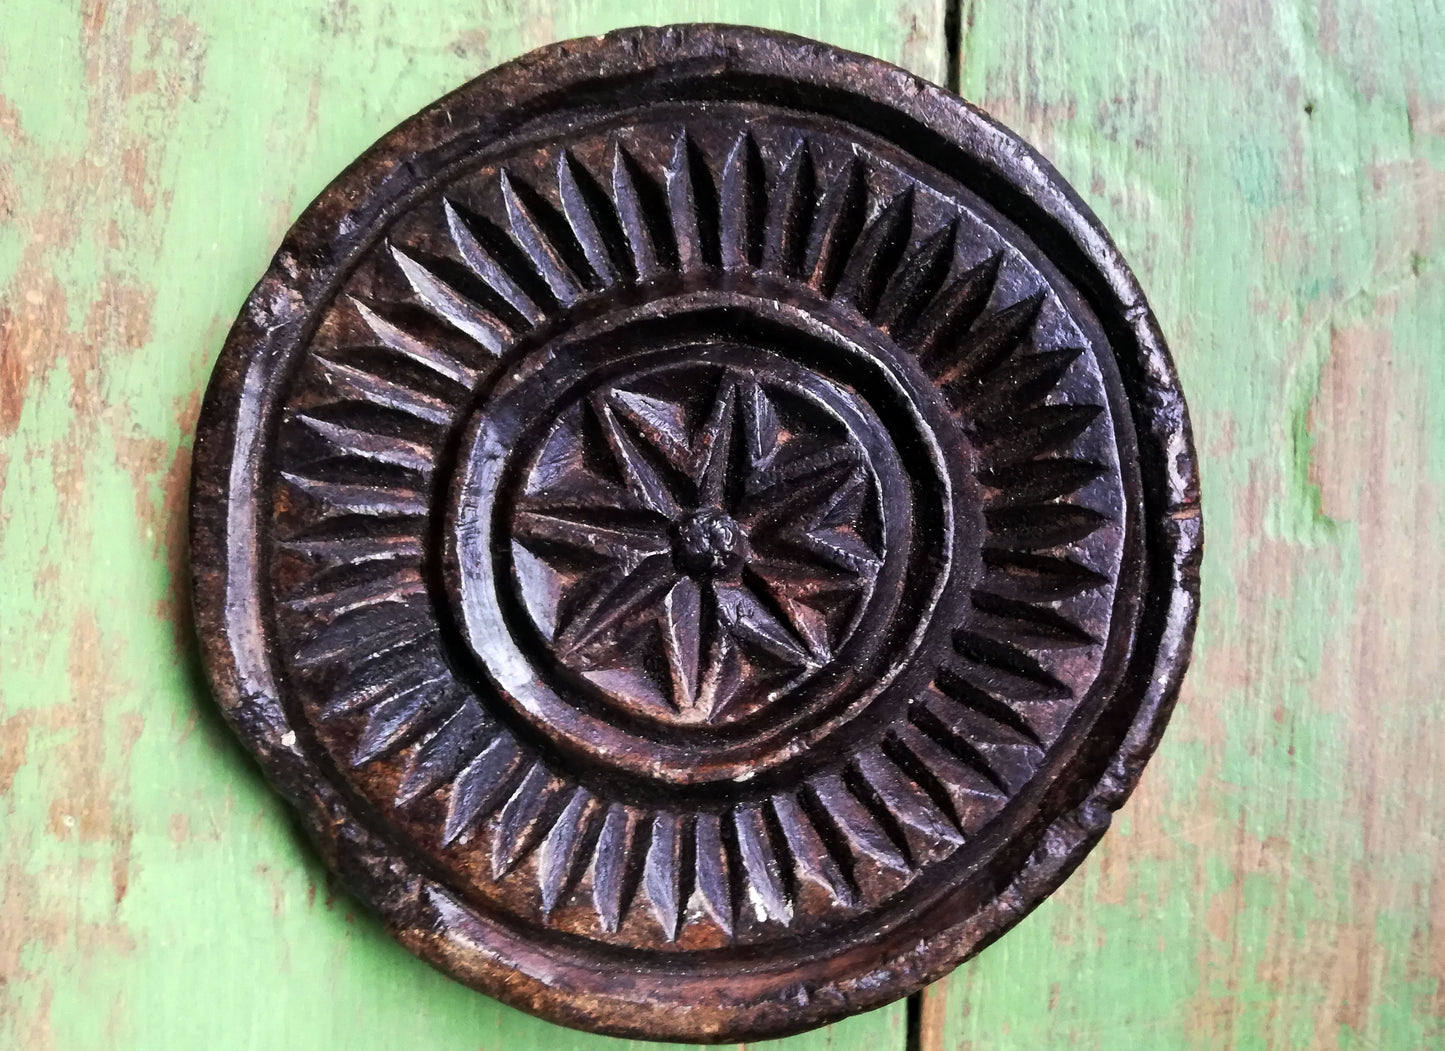 Antique stone chapati moulds. These make prefect trivets and pot stands